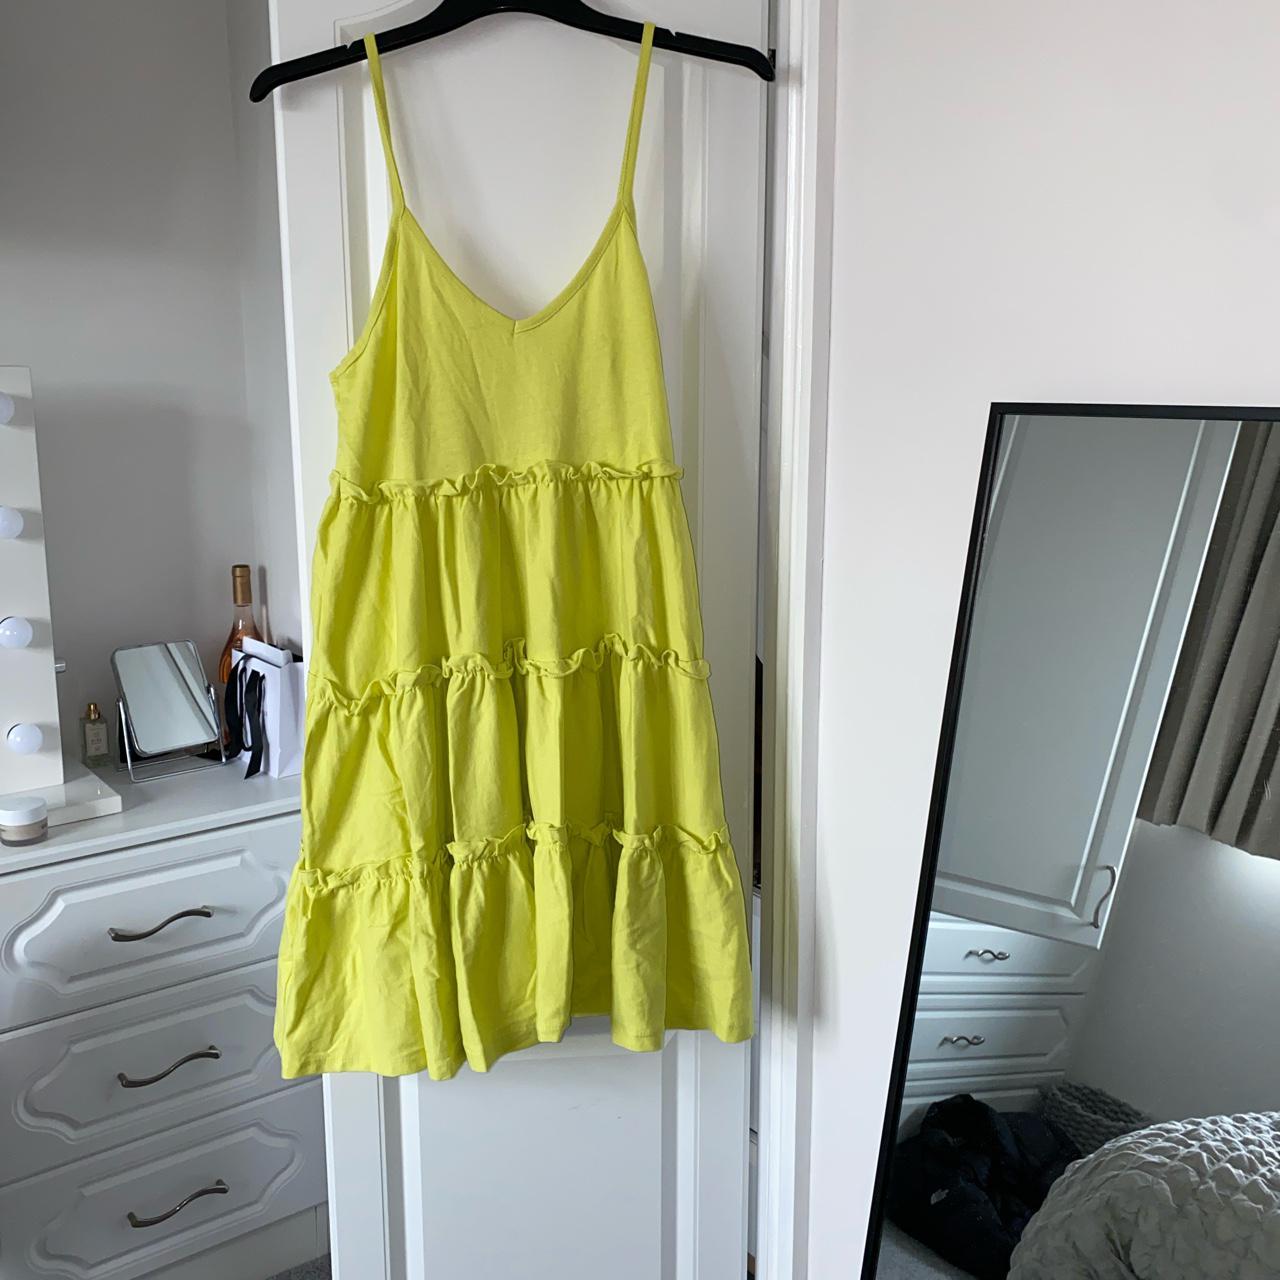 Zara lime green dress brand new without ...